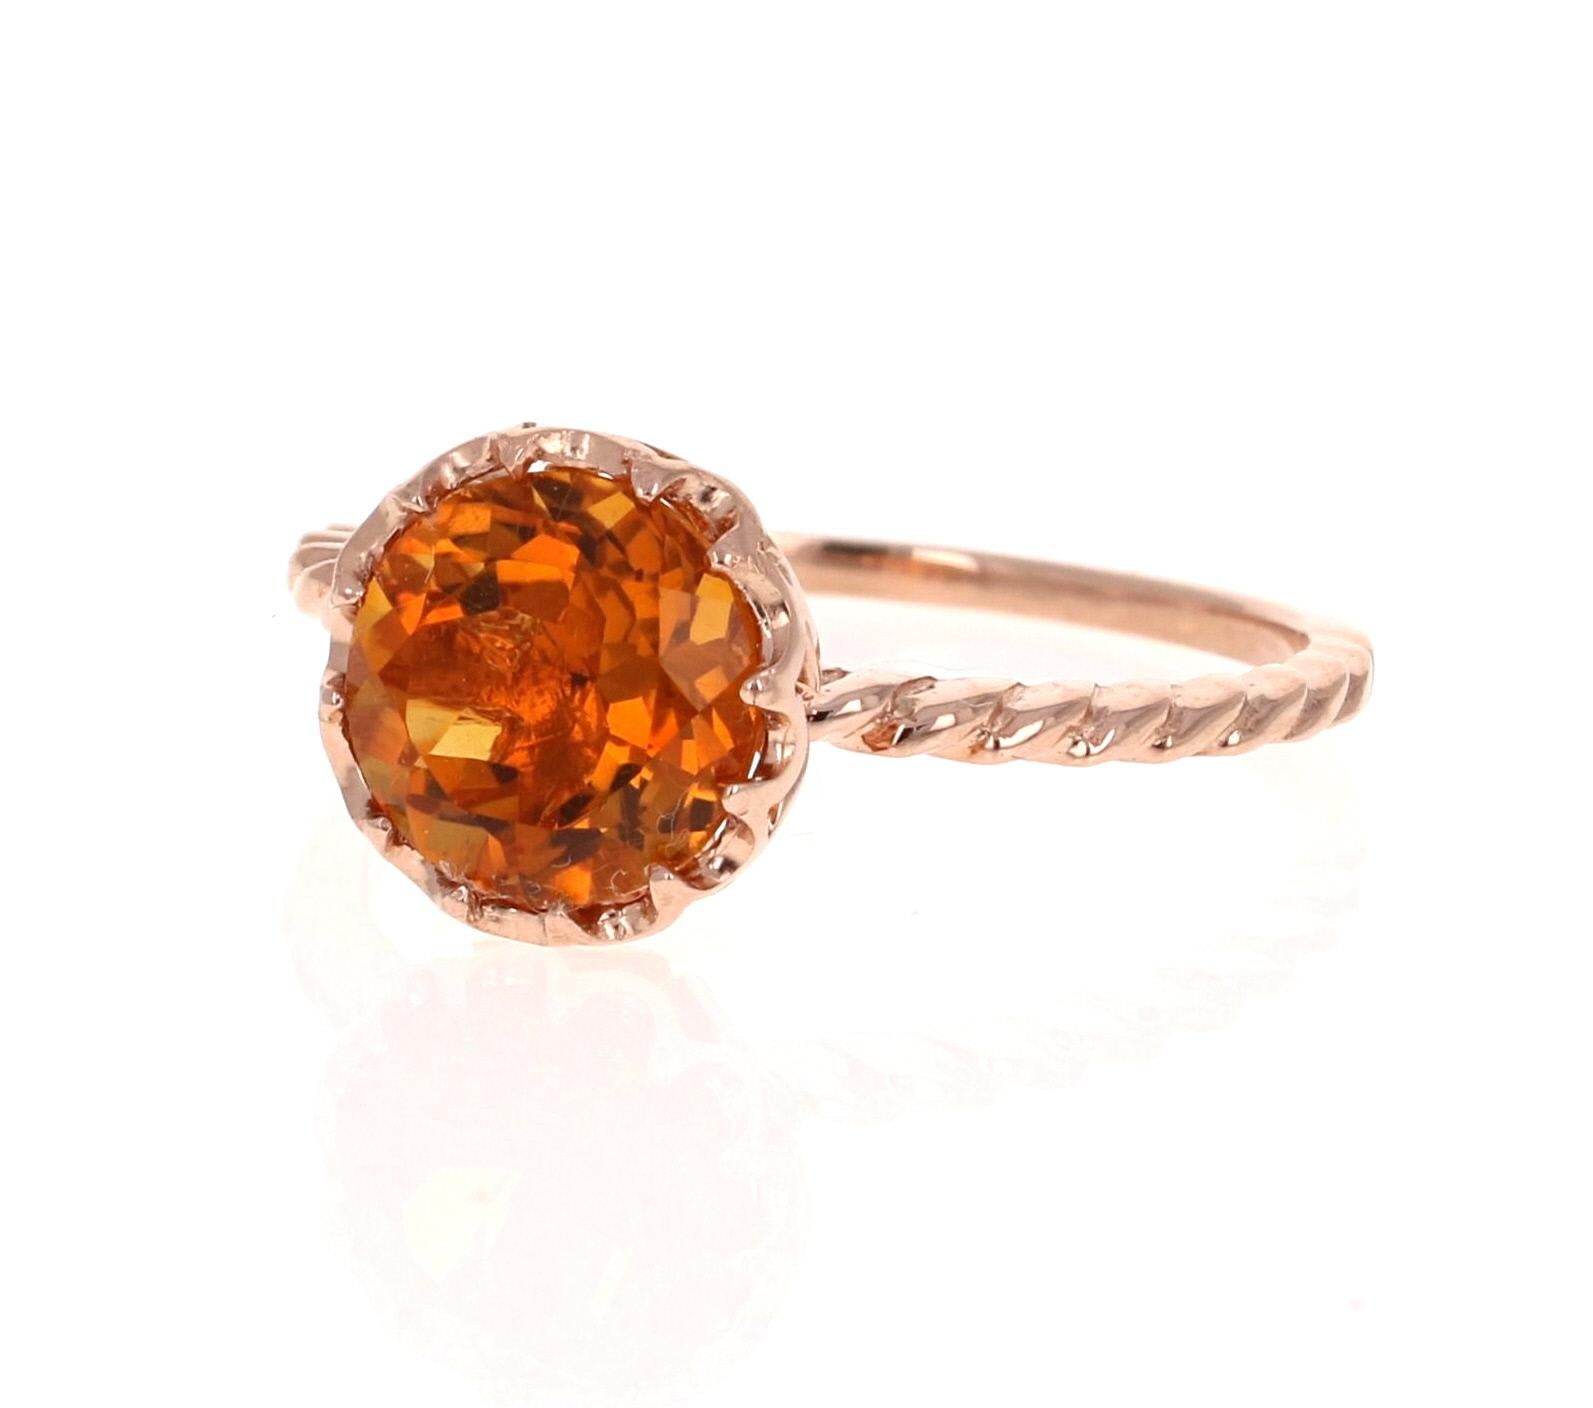 This beautiful and simple ring has a bright and vivid Round Cut Citrine Quartz in the center that weighs 1.81 carats. 
It is set in a beautifully crafted wire style 14 Karat Rose Gold setting and weighs approximately 1.8 grams.  Very light weight